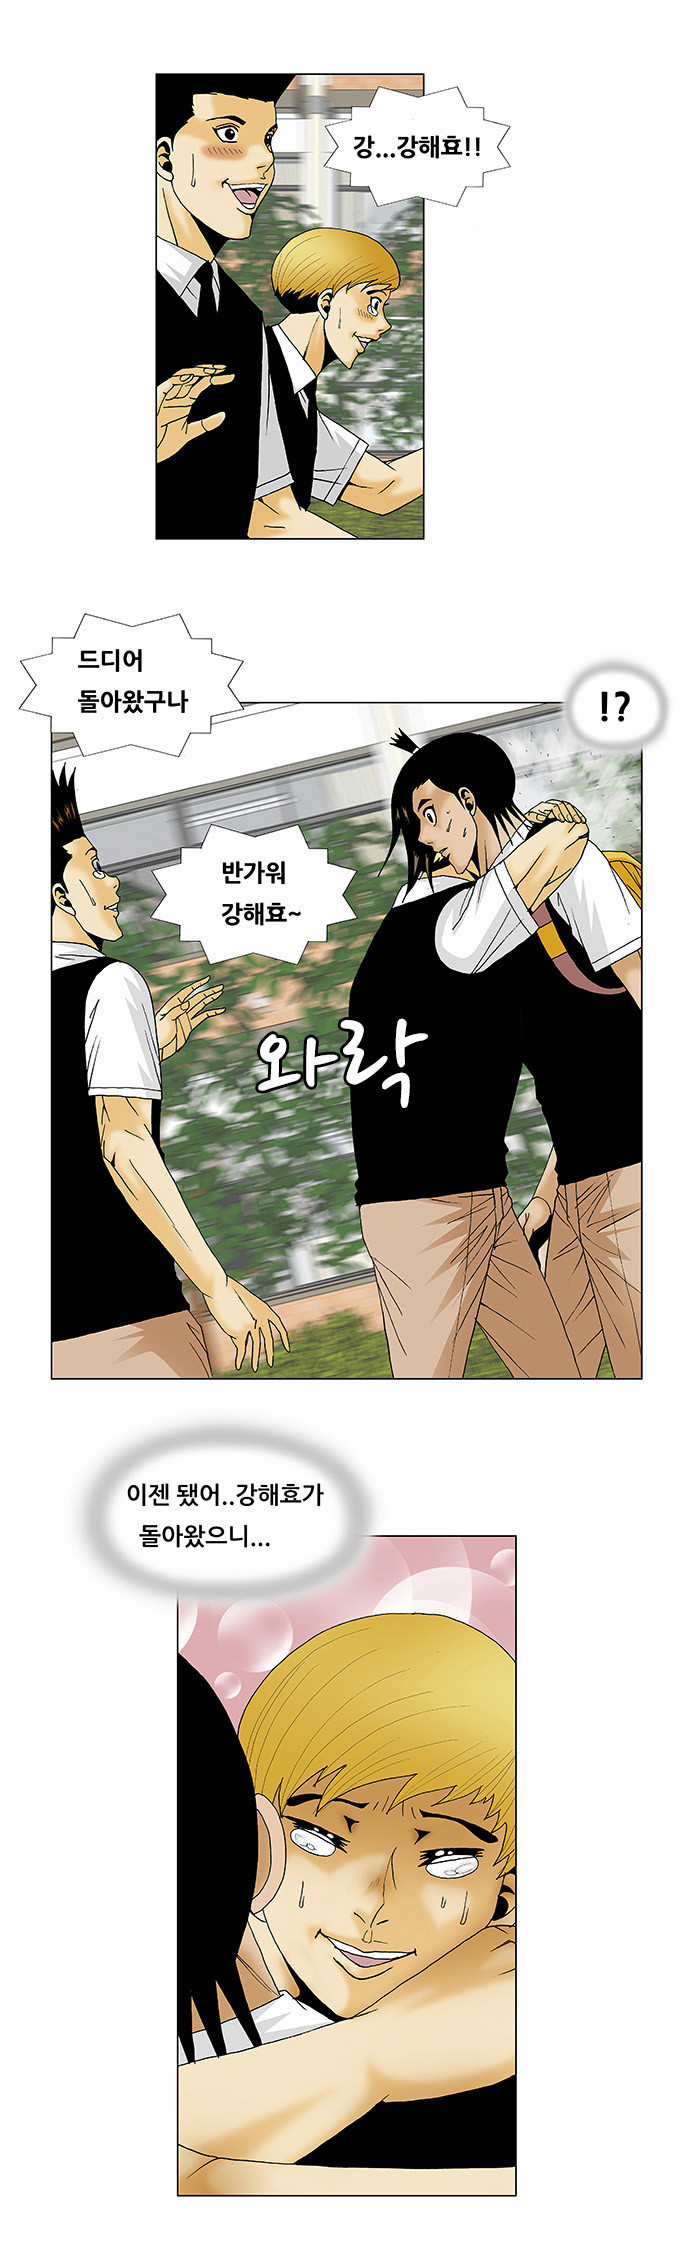 Ultimate Legend - Kang Hae Hyo - Chapter 115 - Page 4